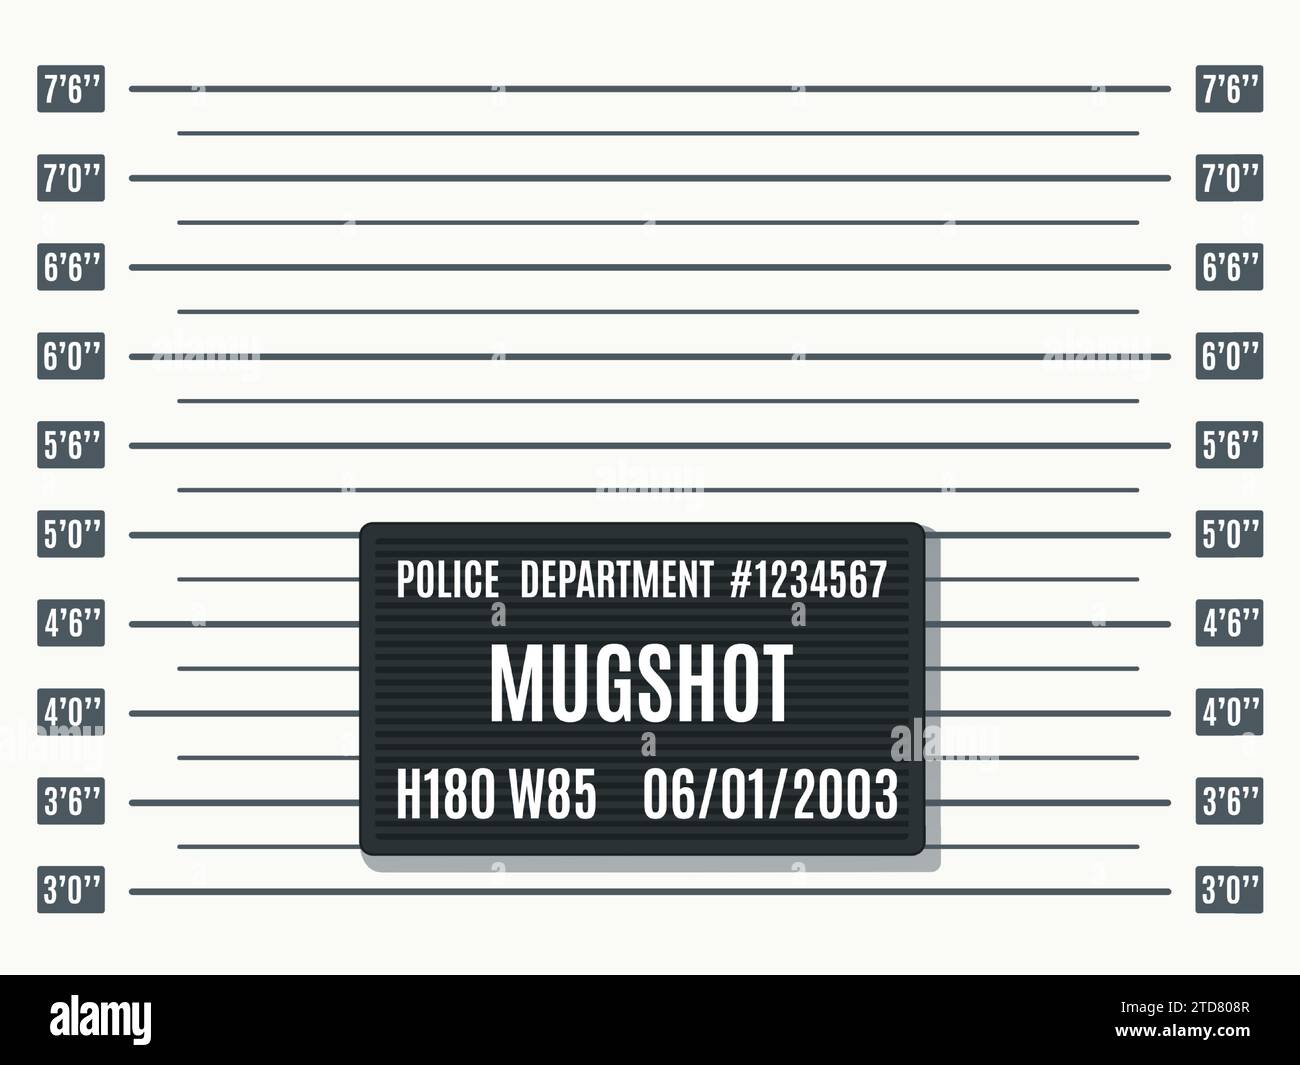 Mugshot photo template. Law enforcement, jail booking photography backdrop template with height measurement chart and black police department placard Stock Vector